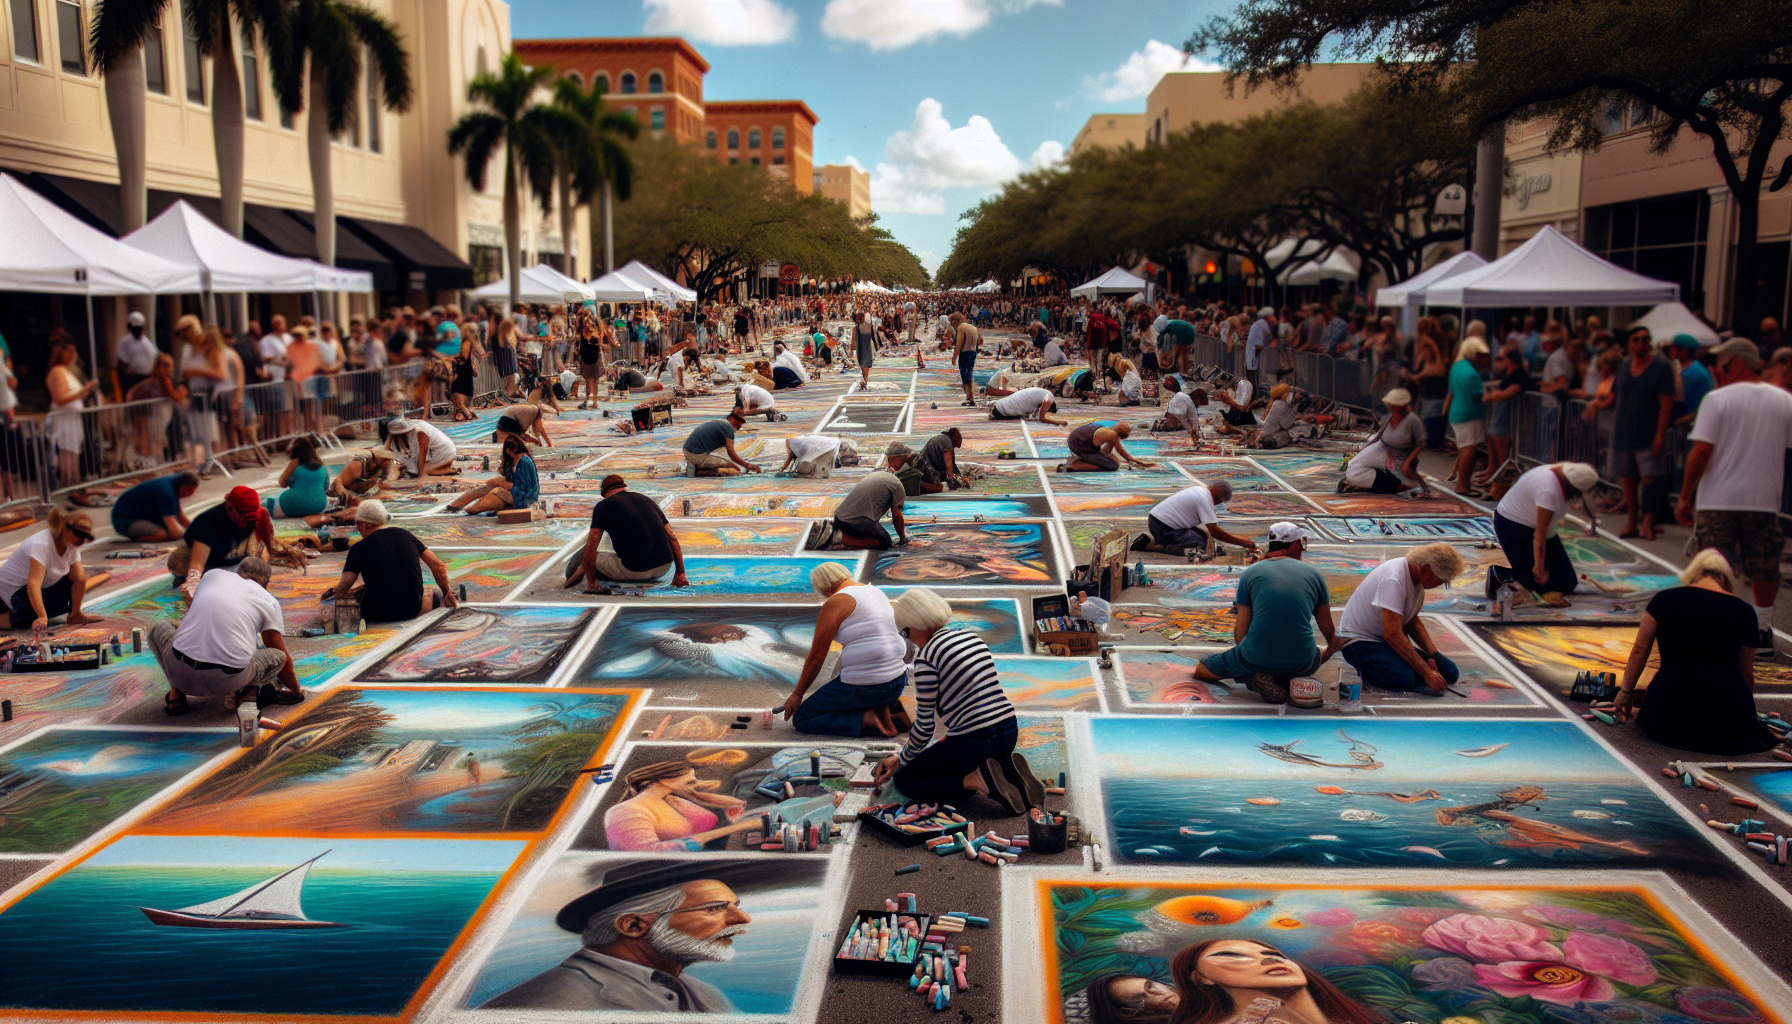 Attend the Sarasota Chalk Festival: A Colorful Celebration of Art and Creativity